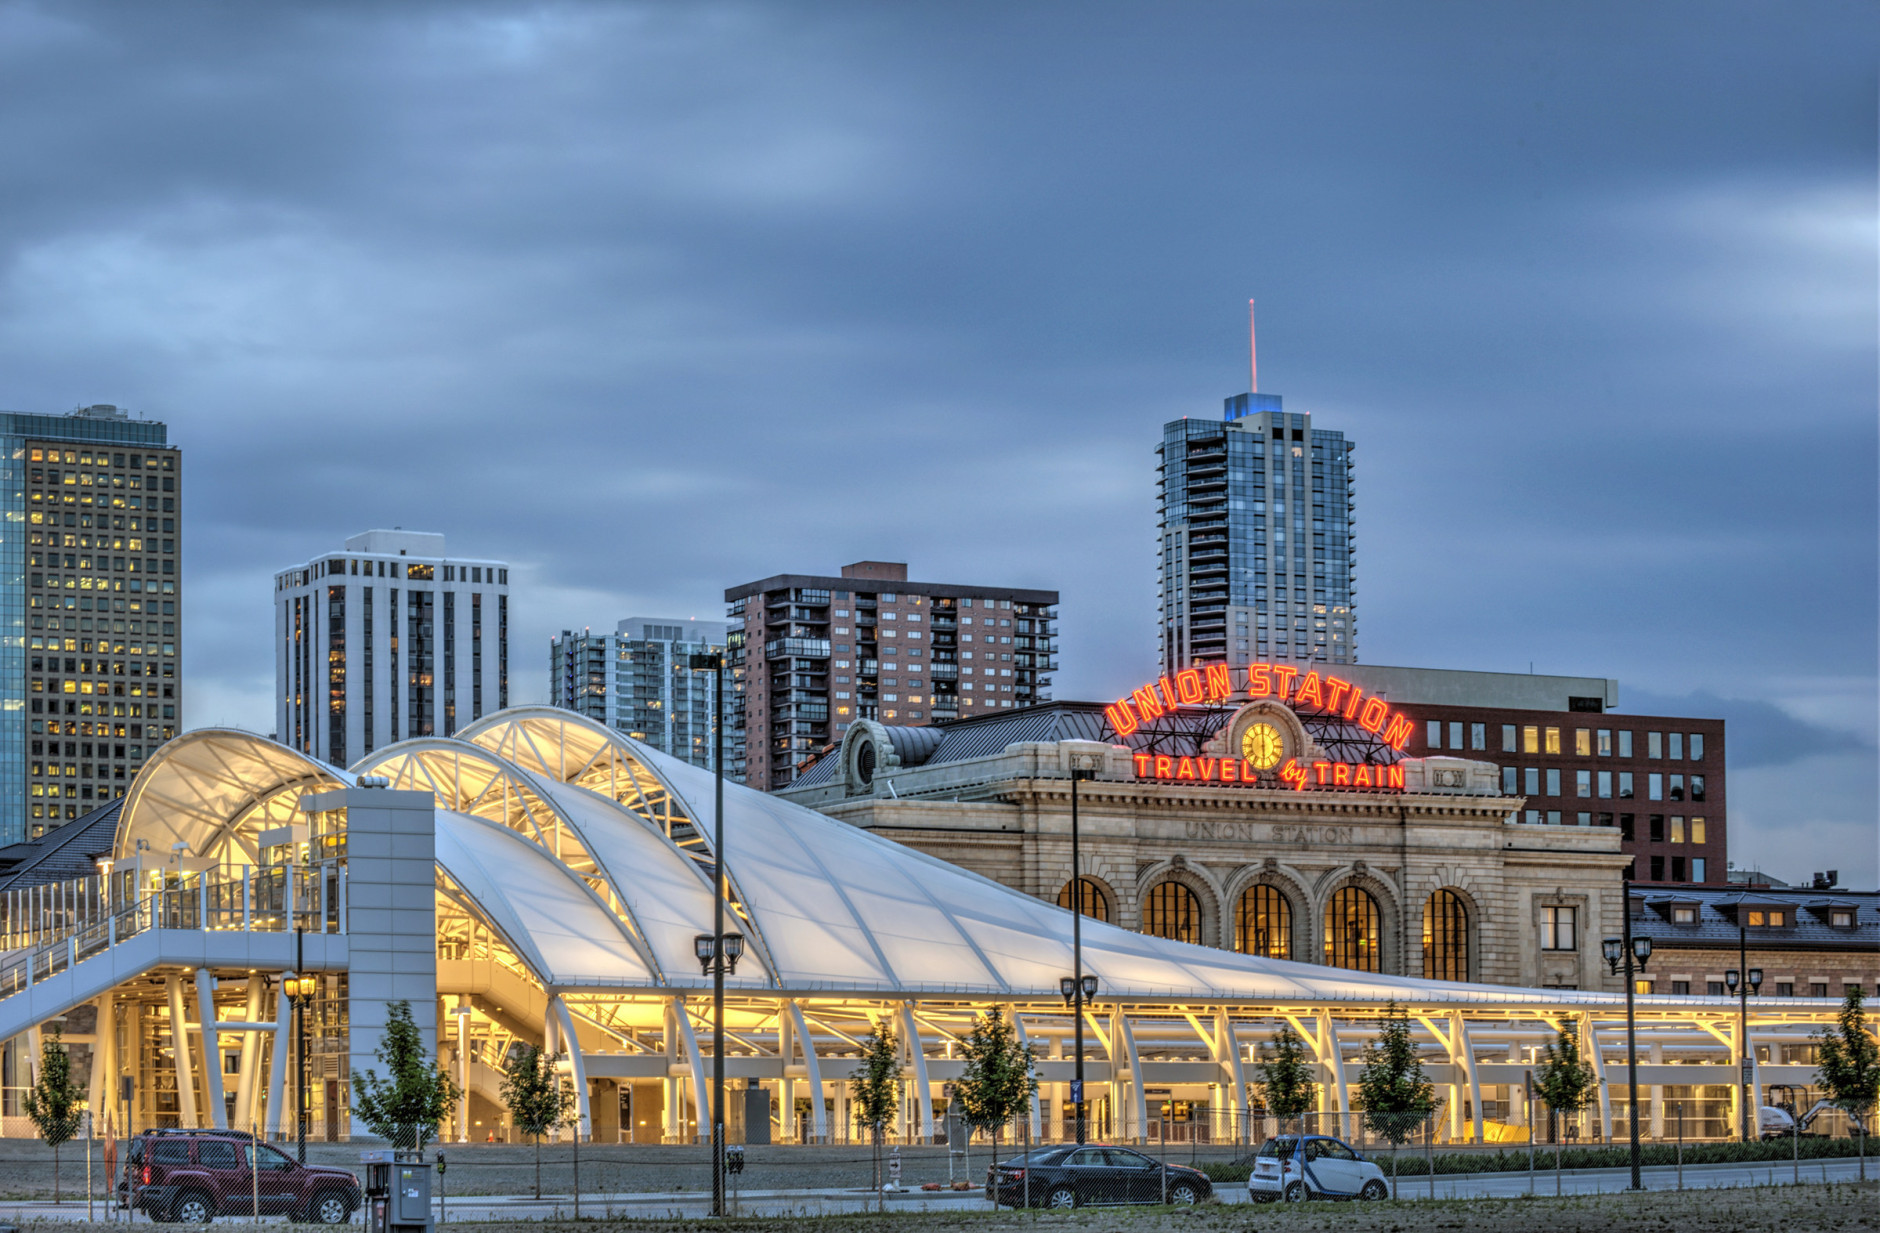 Denver Union Station is officially open featuring transit, restaurants, retail and The Crawford Hotel. (PRNewsFoto/Denver Union Station) THIS CONTENT IS PROVIDED BY PRNewsfoto and is for EDITORIAL USE ONLY**